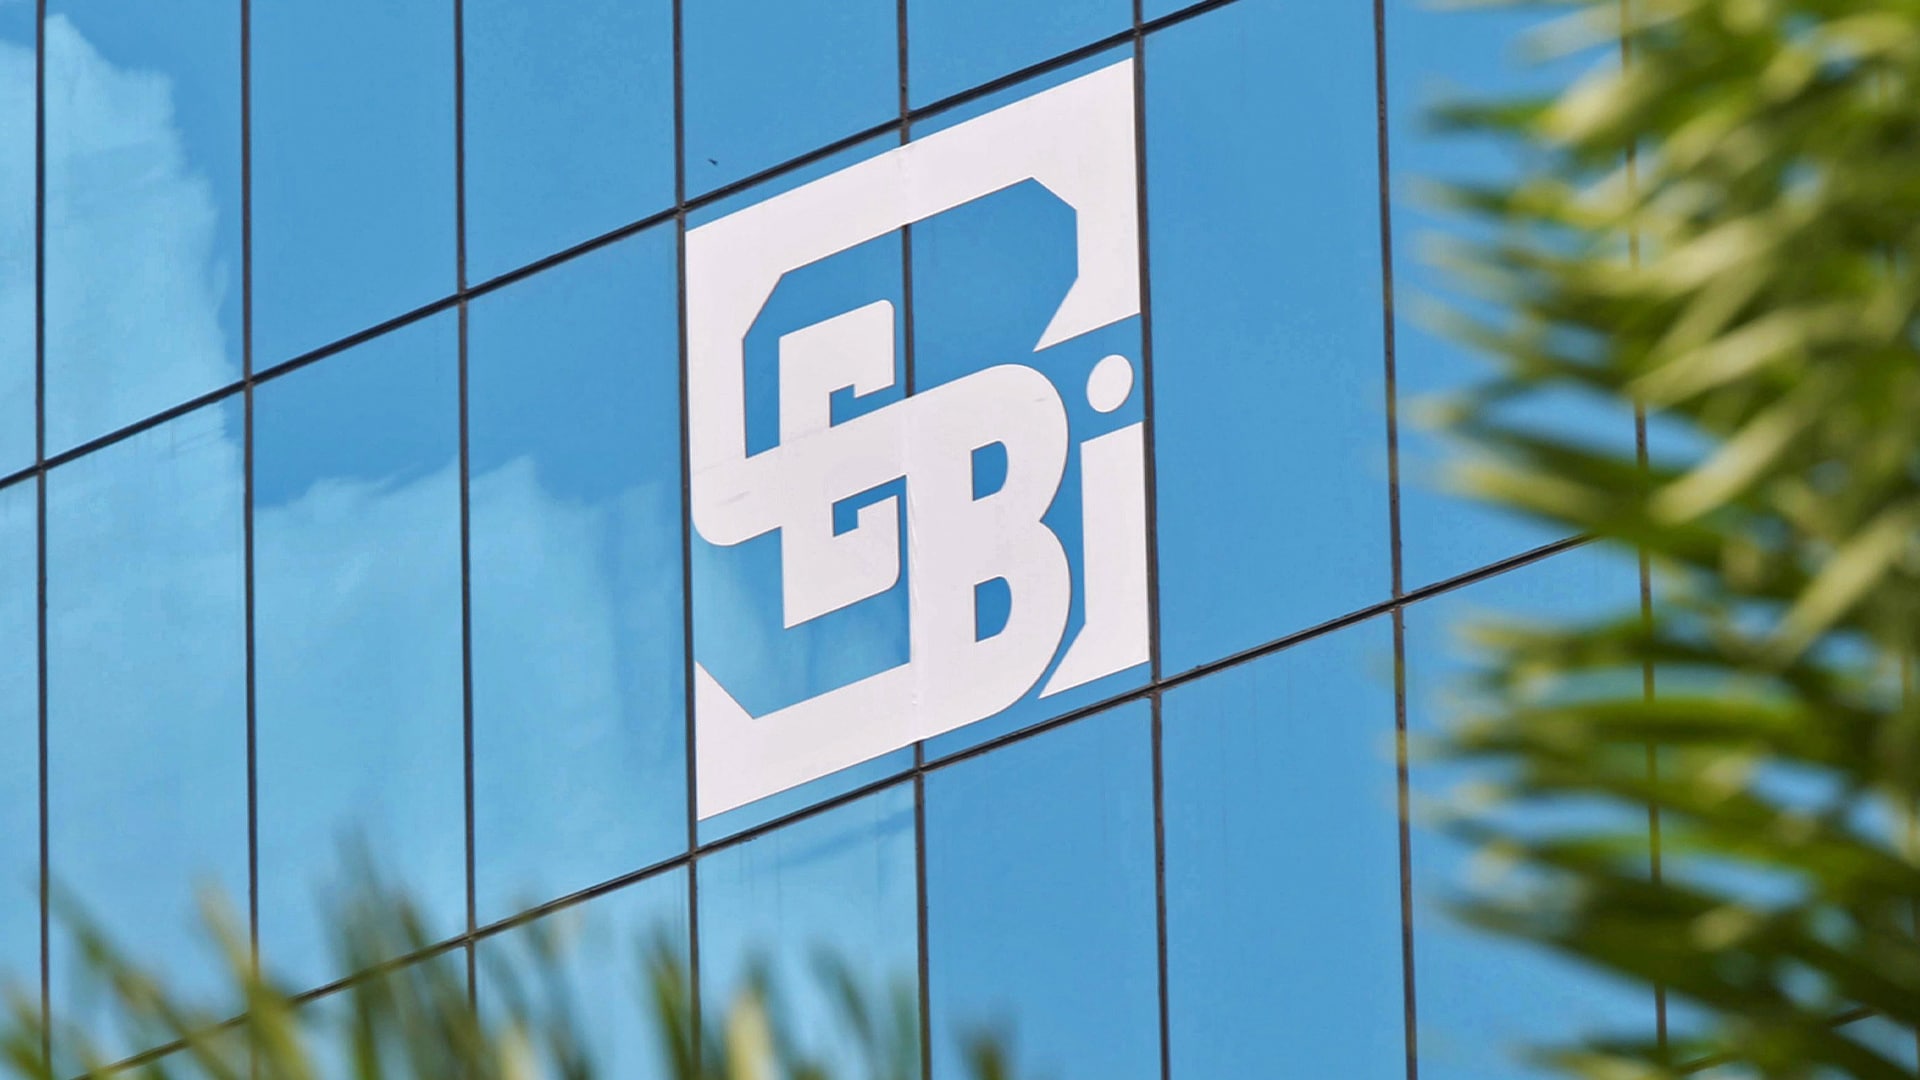 Sebi proposes changes in norms pertaining to non-convertible securities